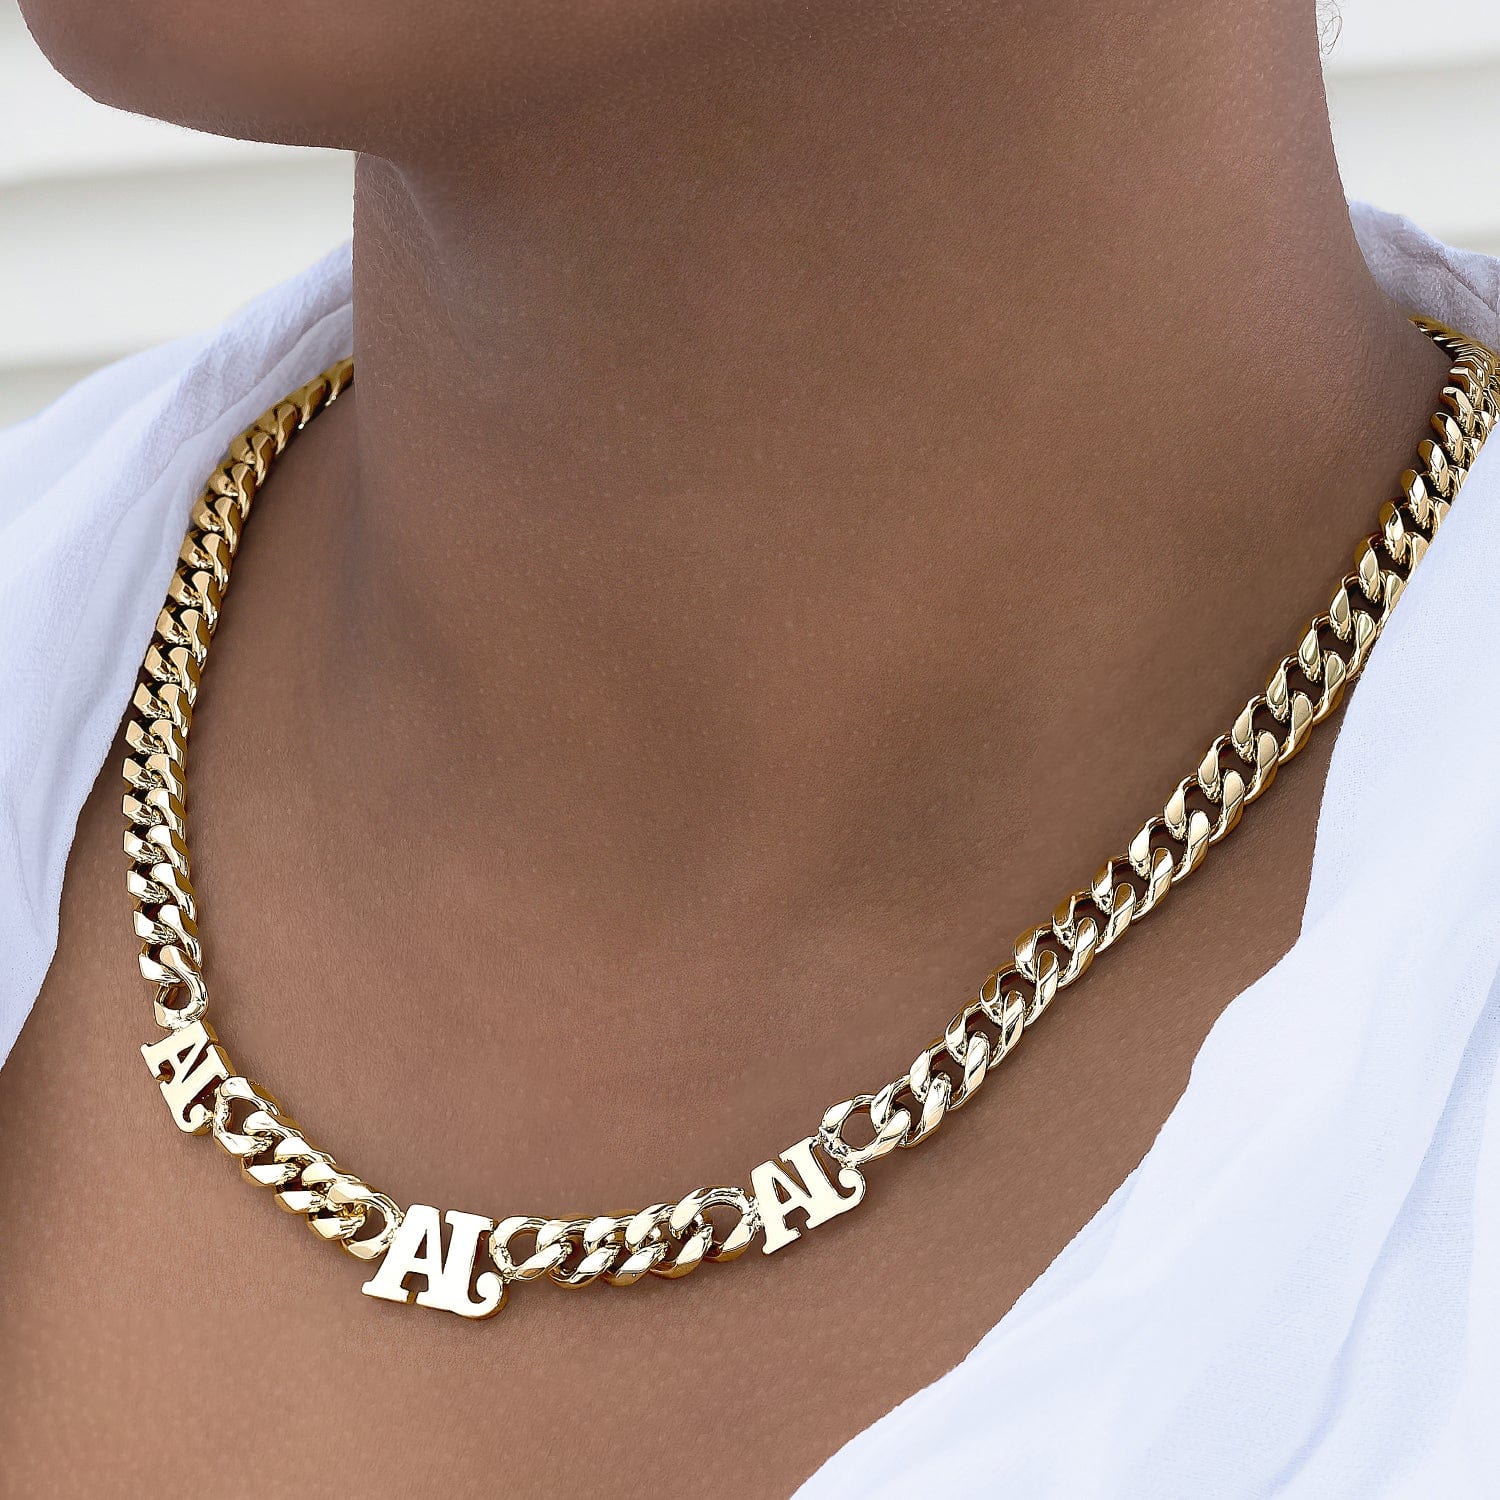 Copy of Stainless Steel Cuban Chain with 2 Initials Necklace